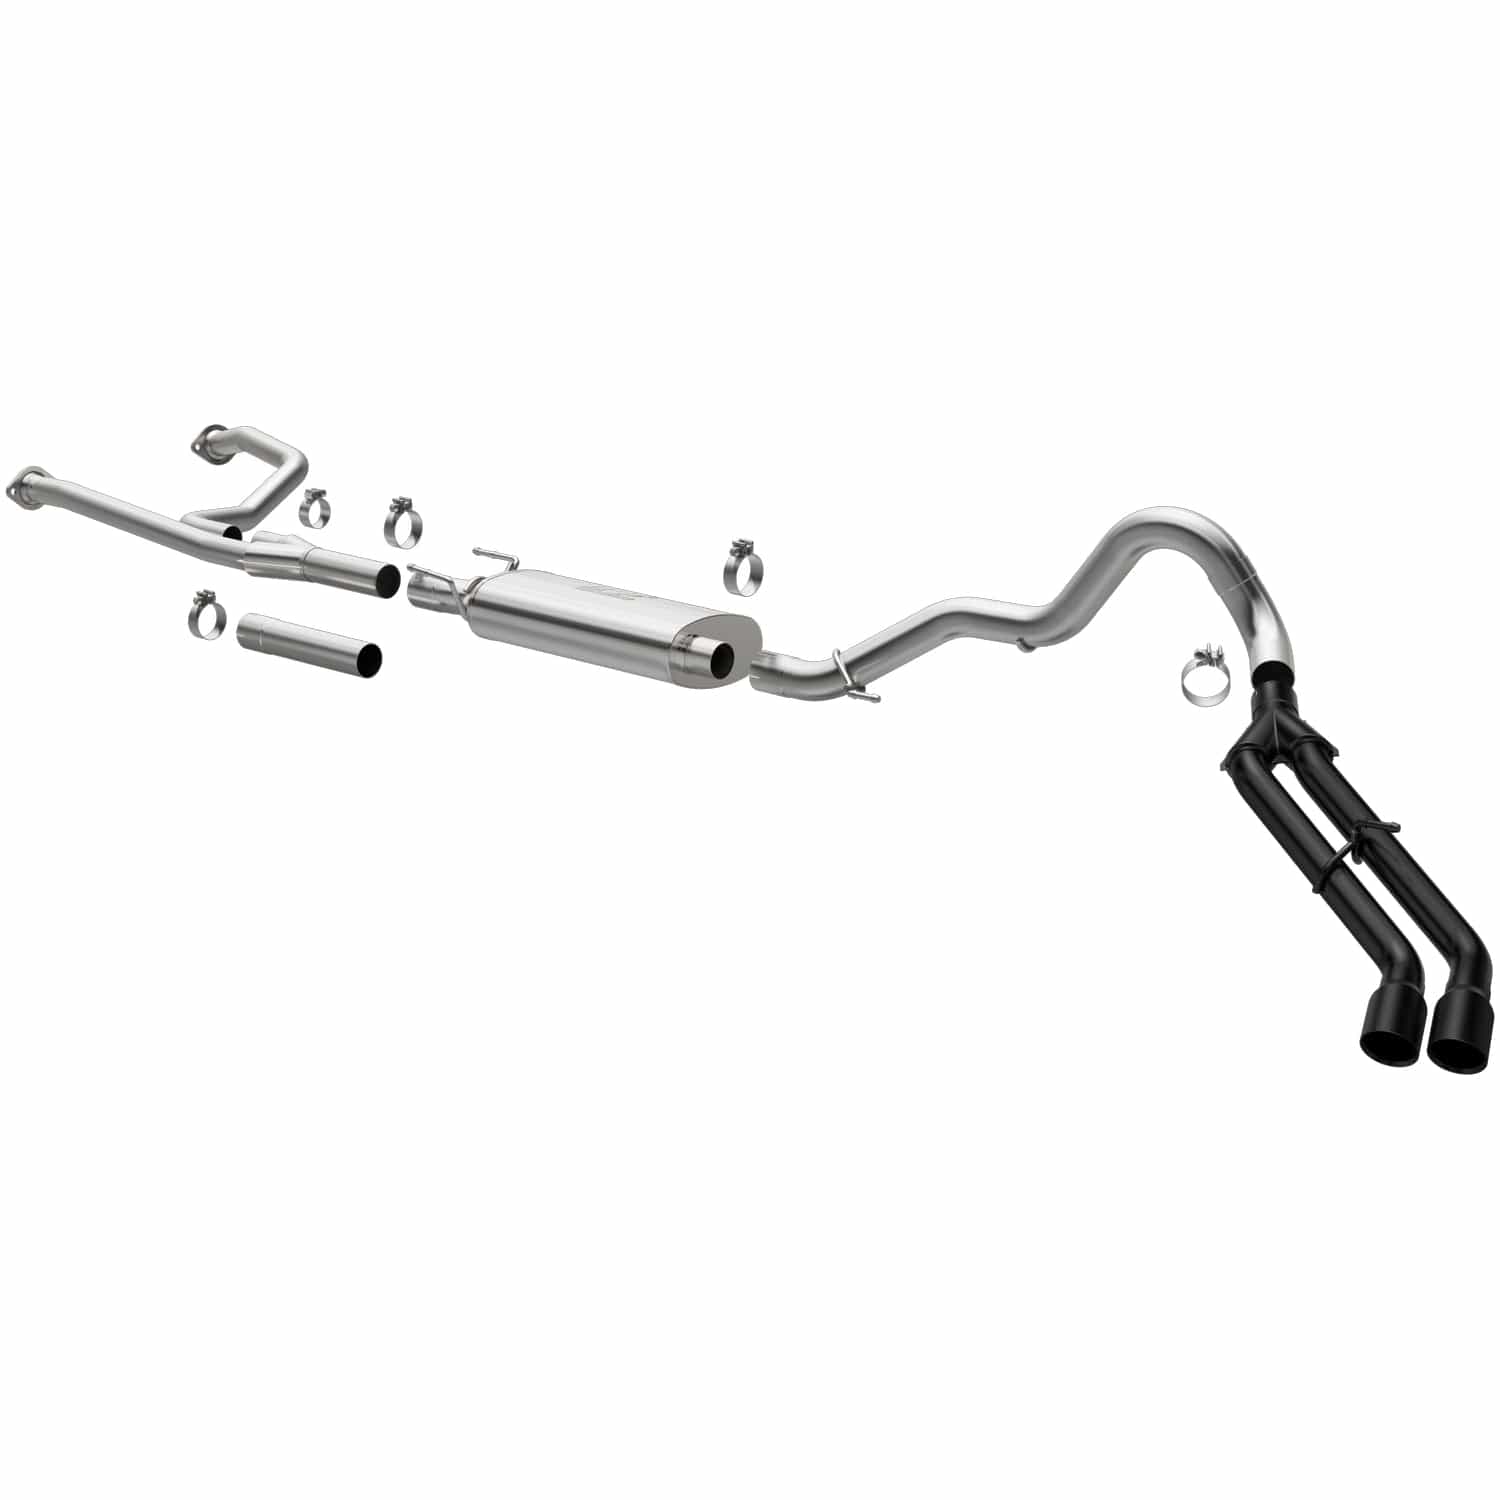 '22-23 Toyota Tundra Street Series Cat-Back Performance Exhaust System MagnaFlow parts